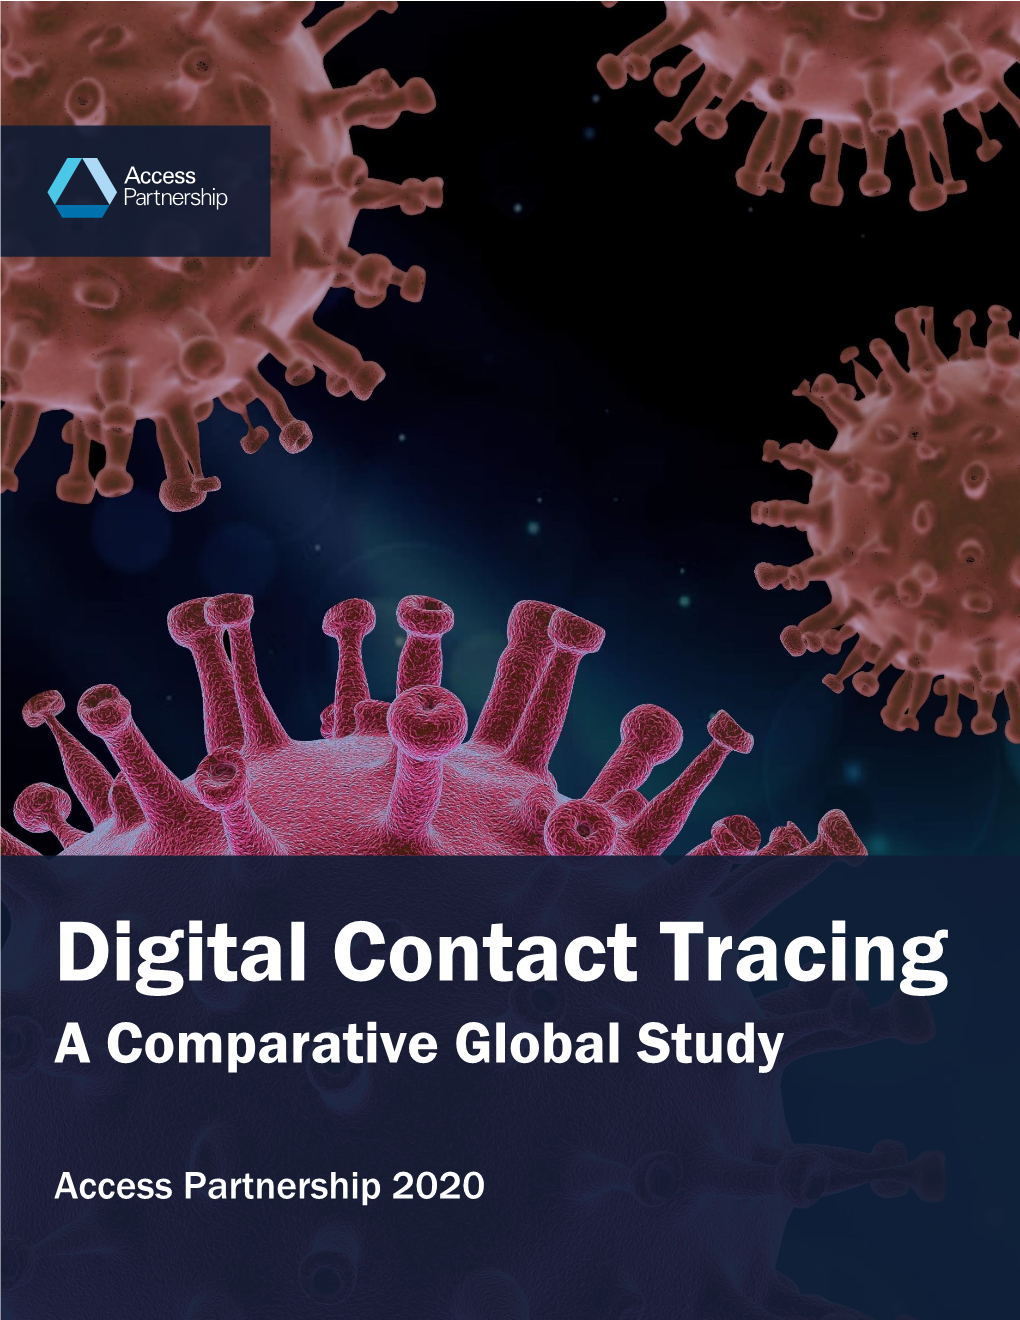 Digital Contact Tracing a Comparative Global Study